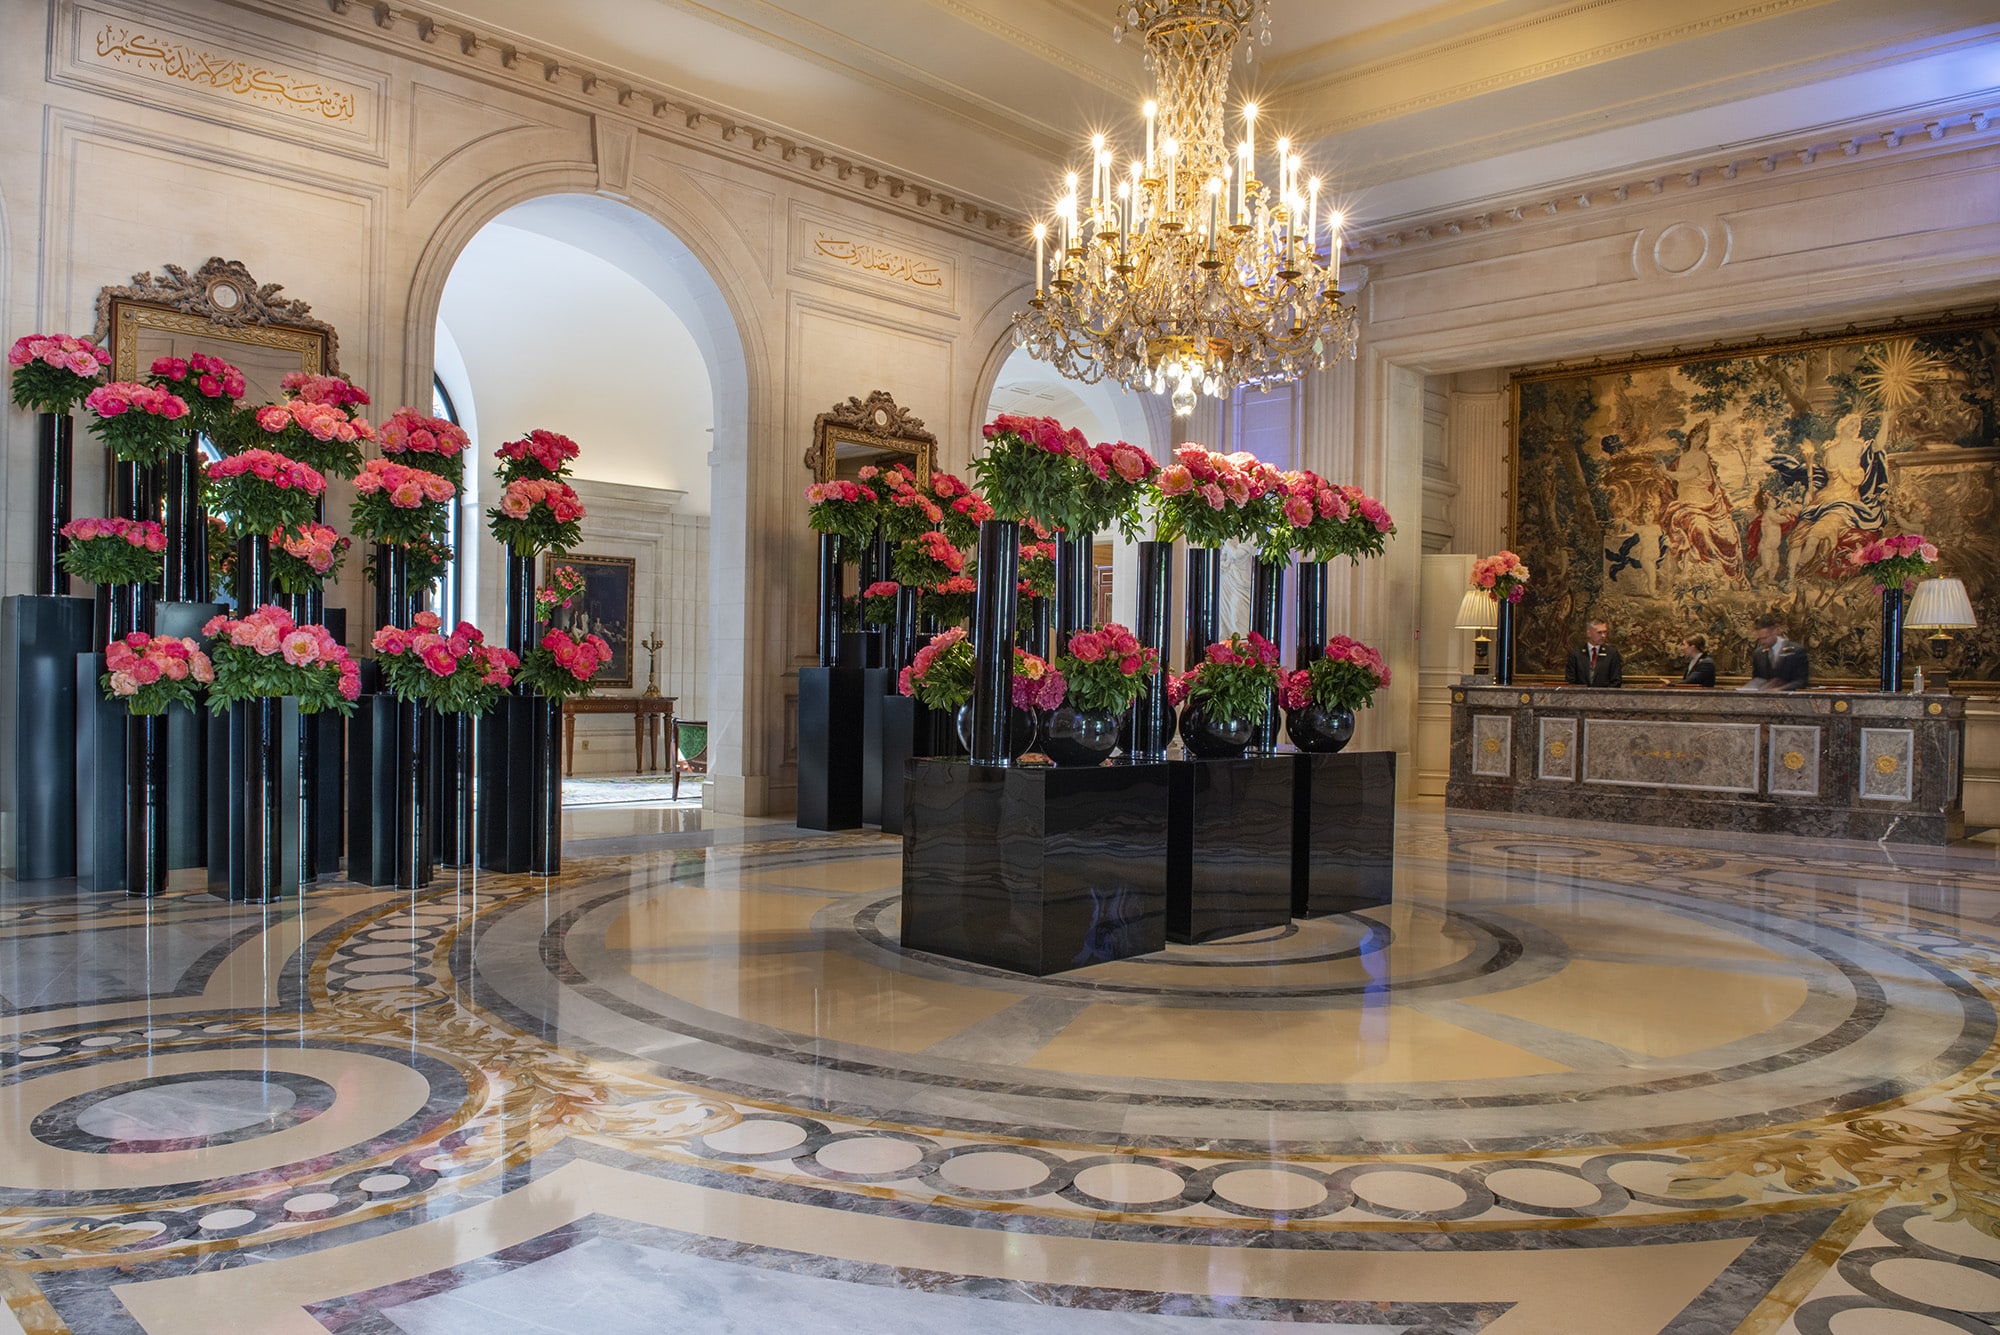 Four Seasons Hotel George V, Paris, in the Spring